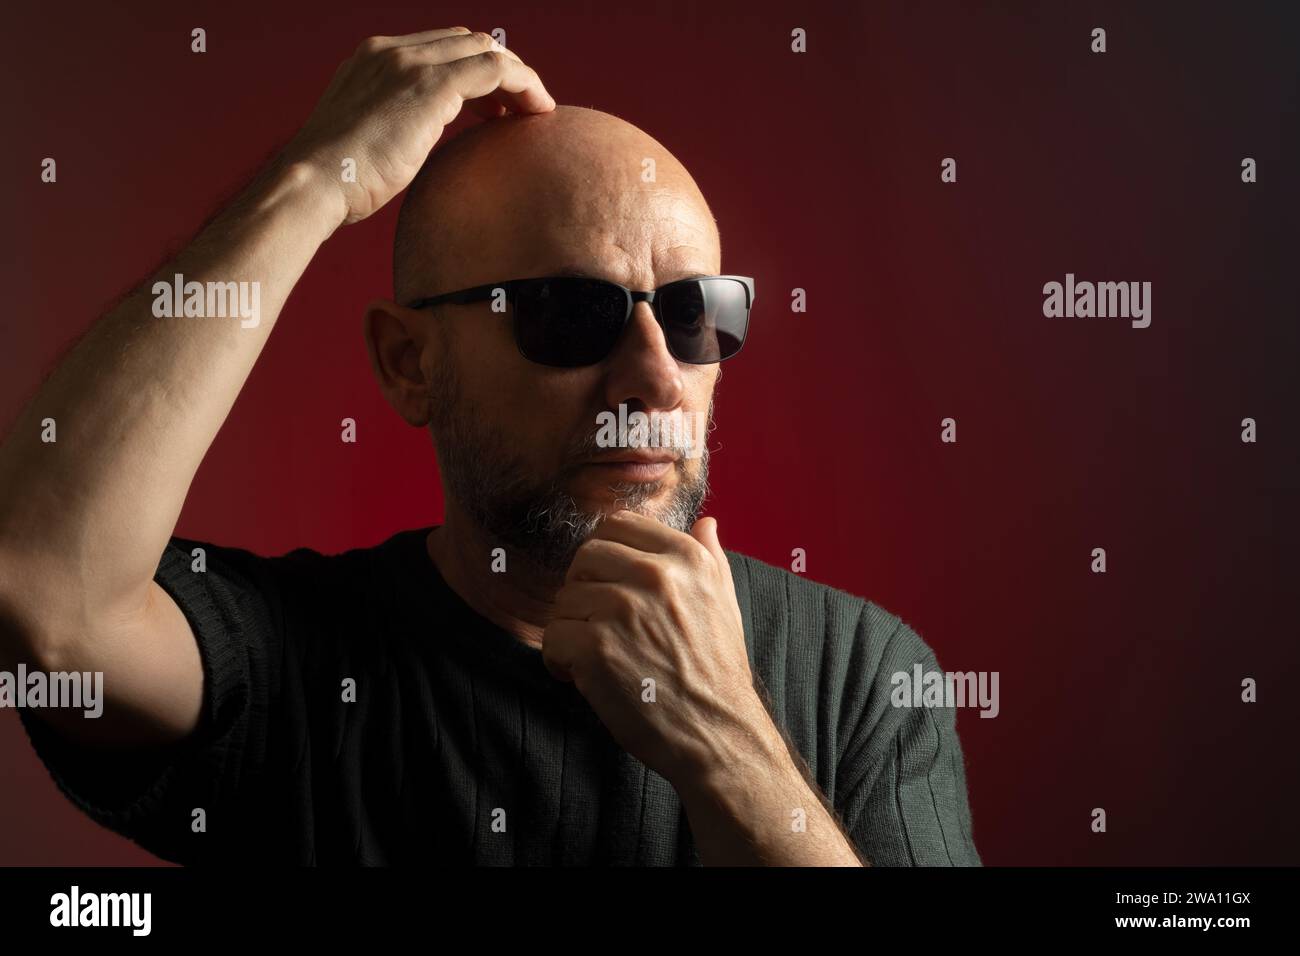 Caucasian man, bald, wearing sunglasses, confidently serious with his hand on his head and chin. Isolated on red background. Stock Photo